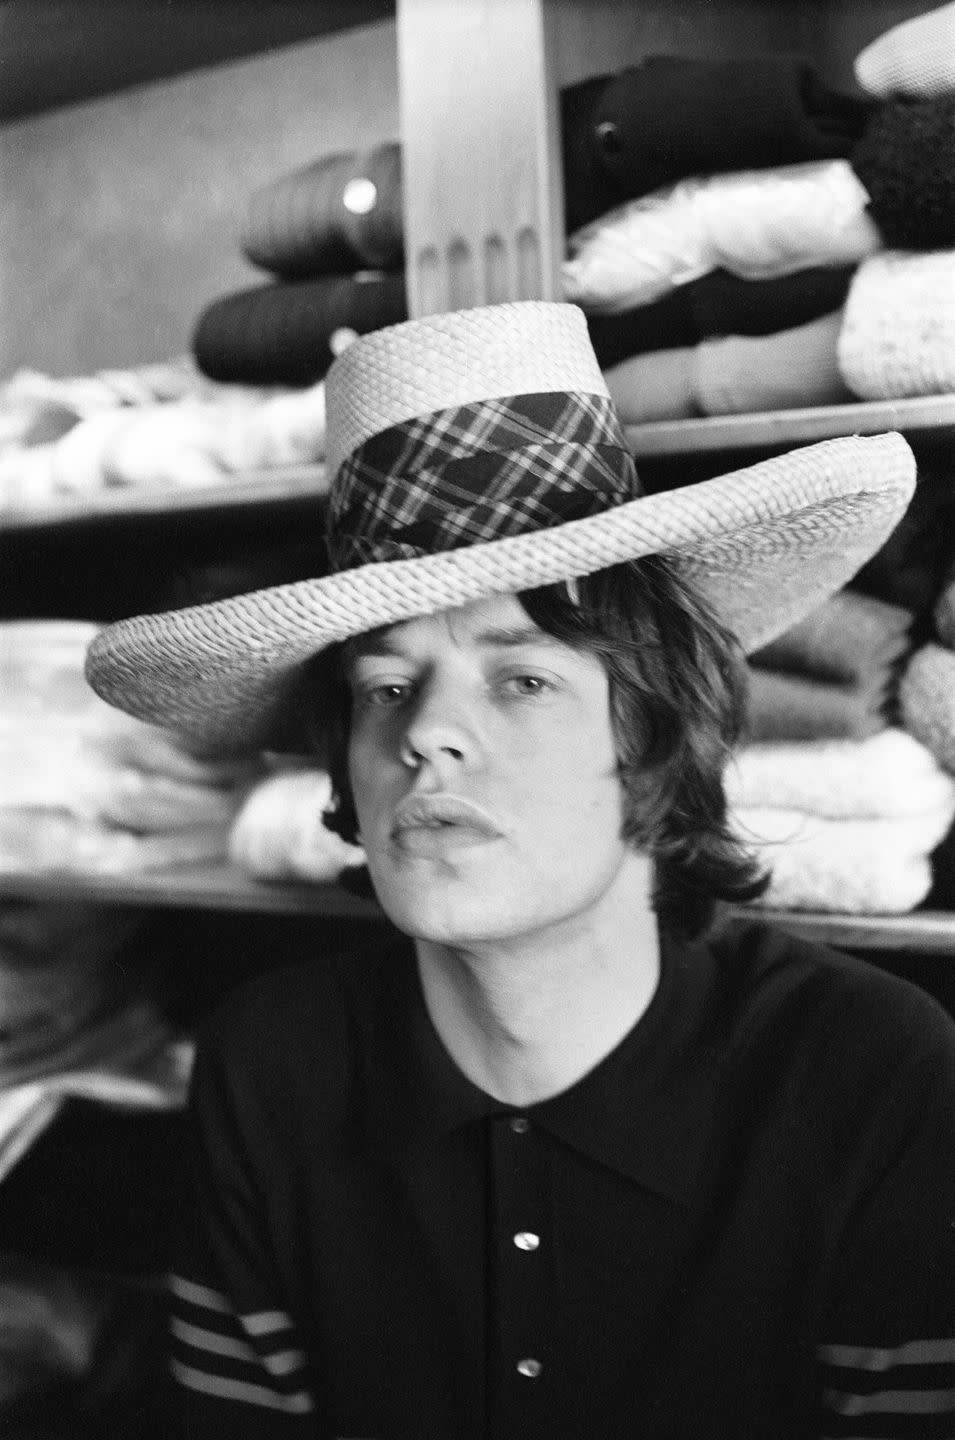 mick jagger on the morning of 4 june 1964 when the rolling stones were taken shopping by their manager, andrew 'loog' ol